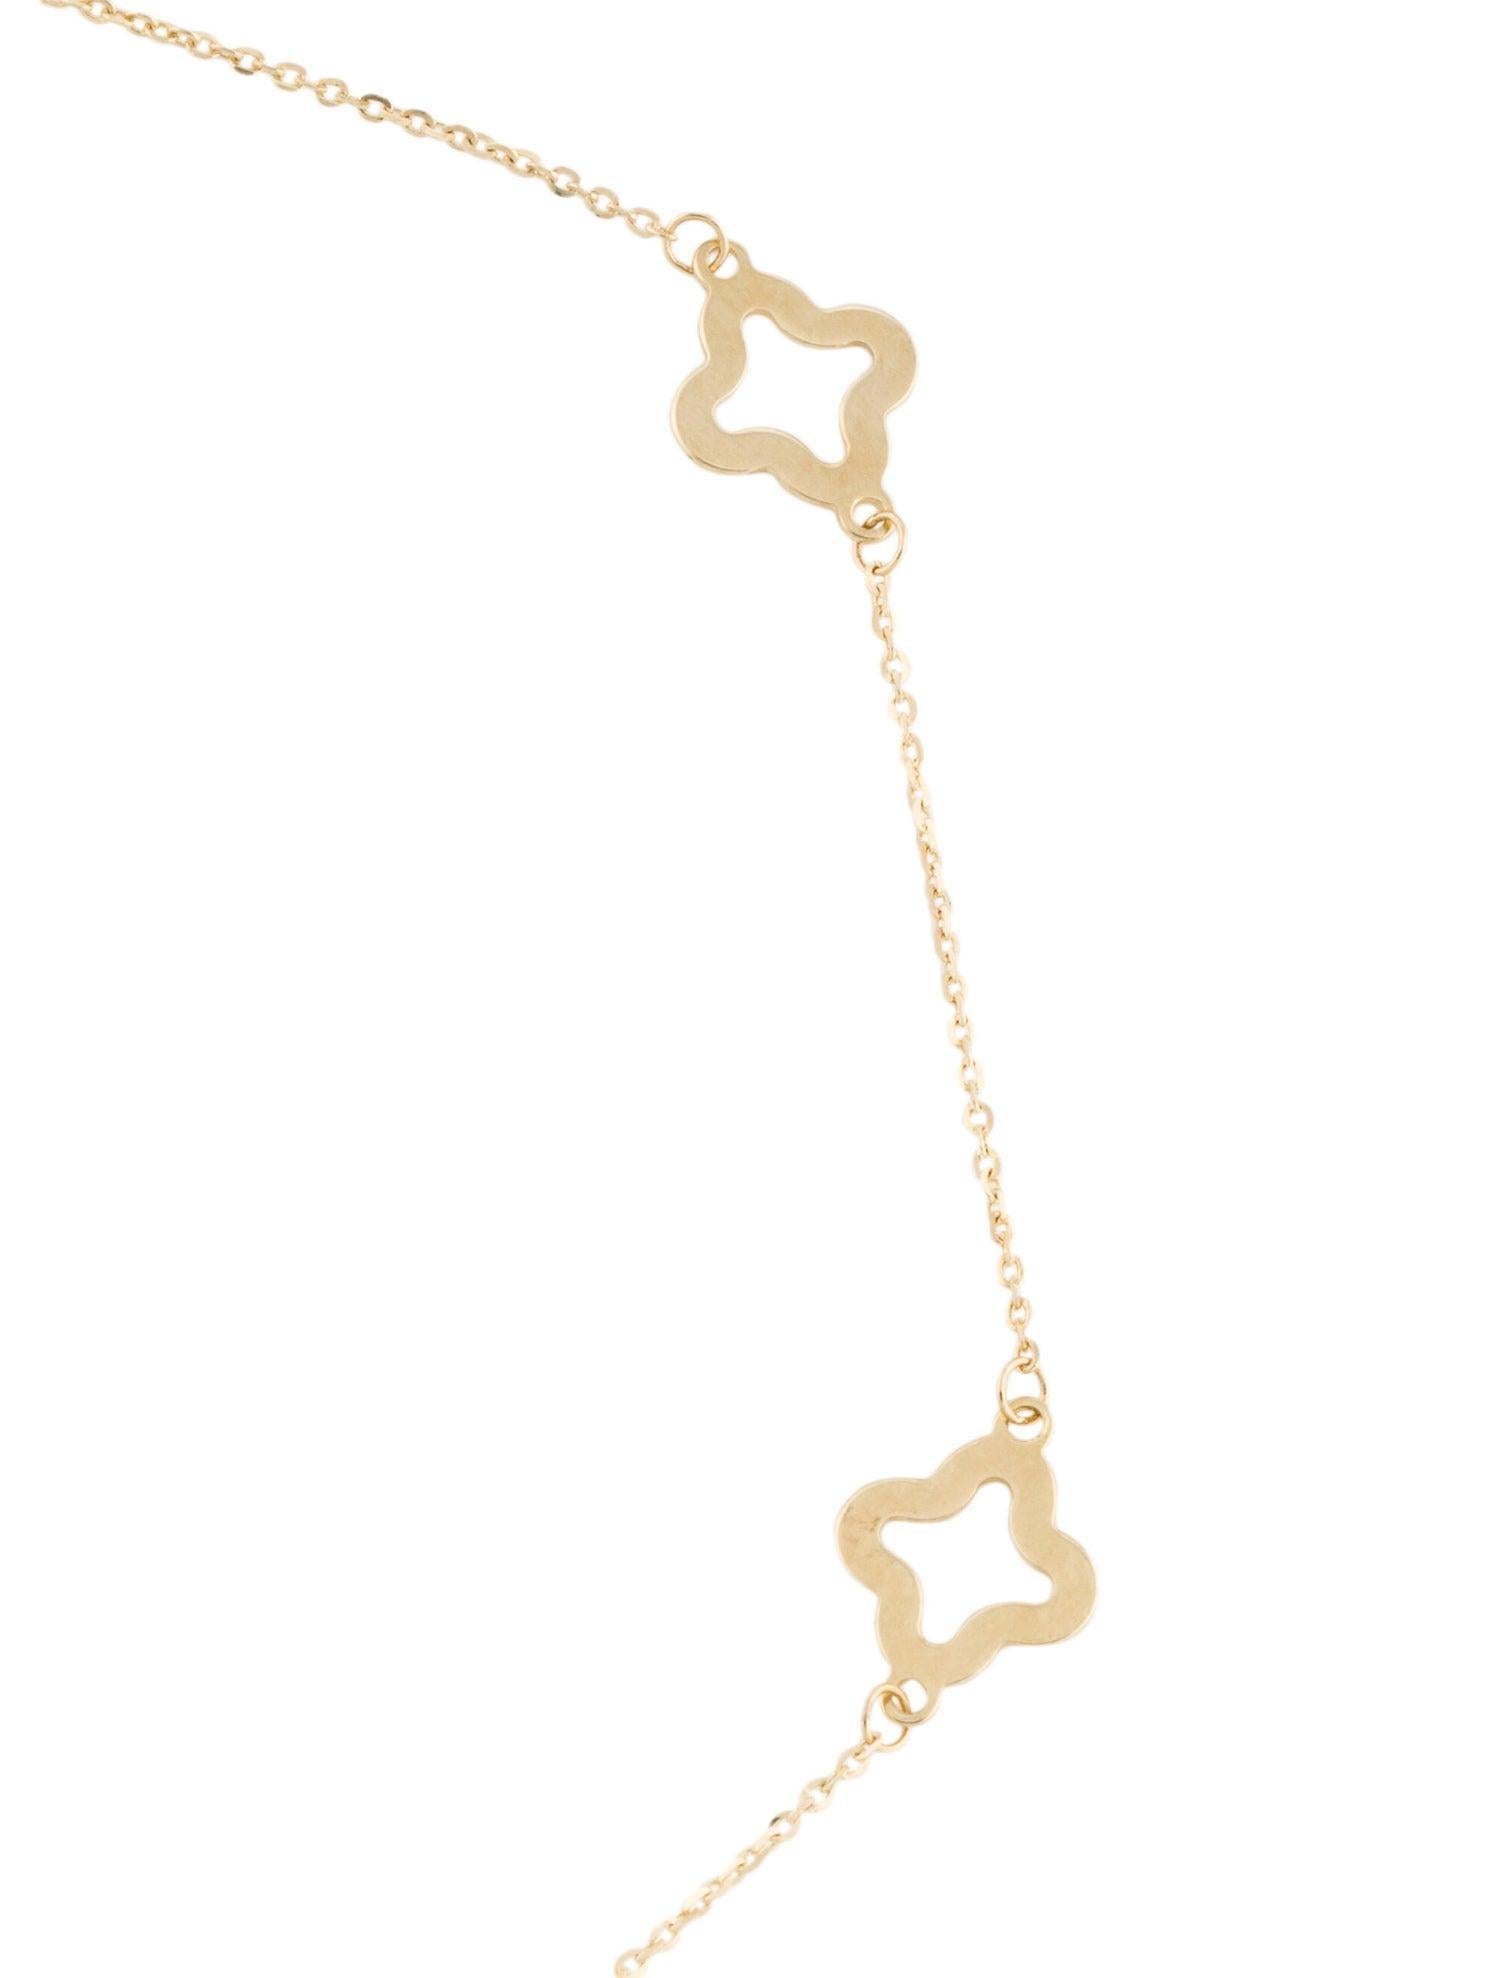 Contemporary 14K Yellow Gold Open Flower Anklet Adjustable for Her For Sale